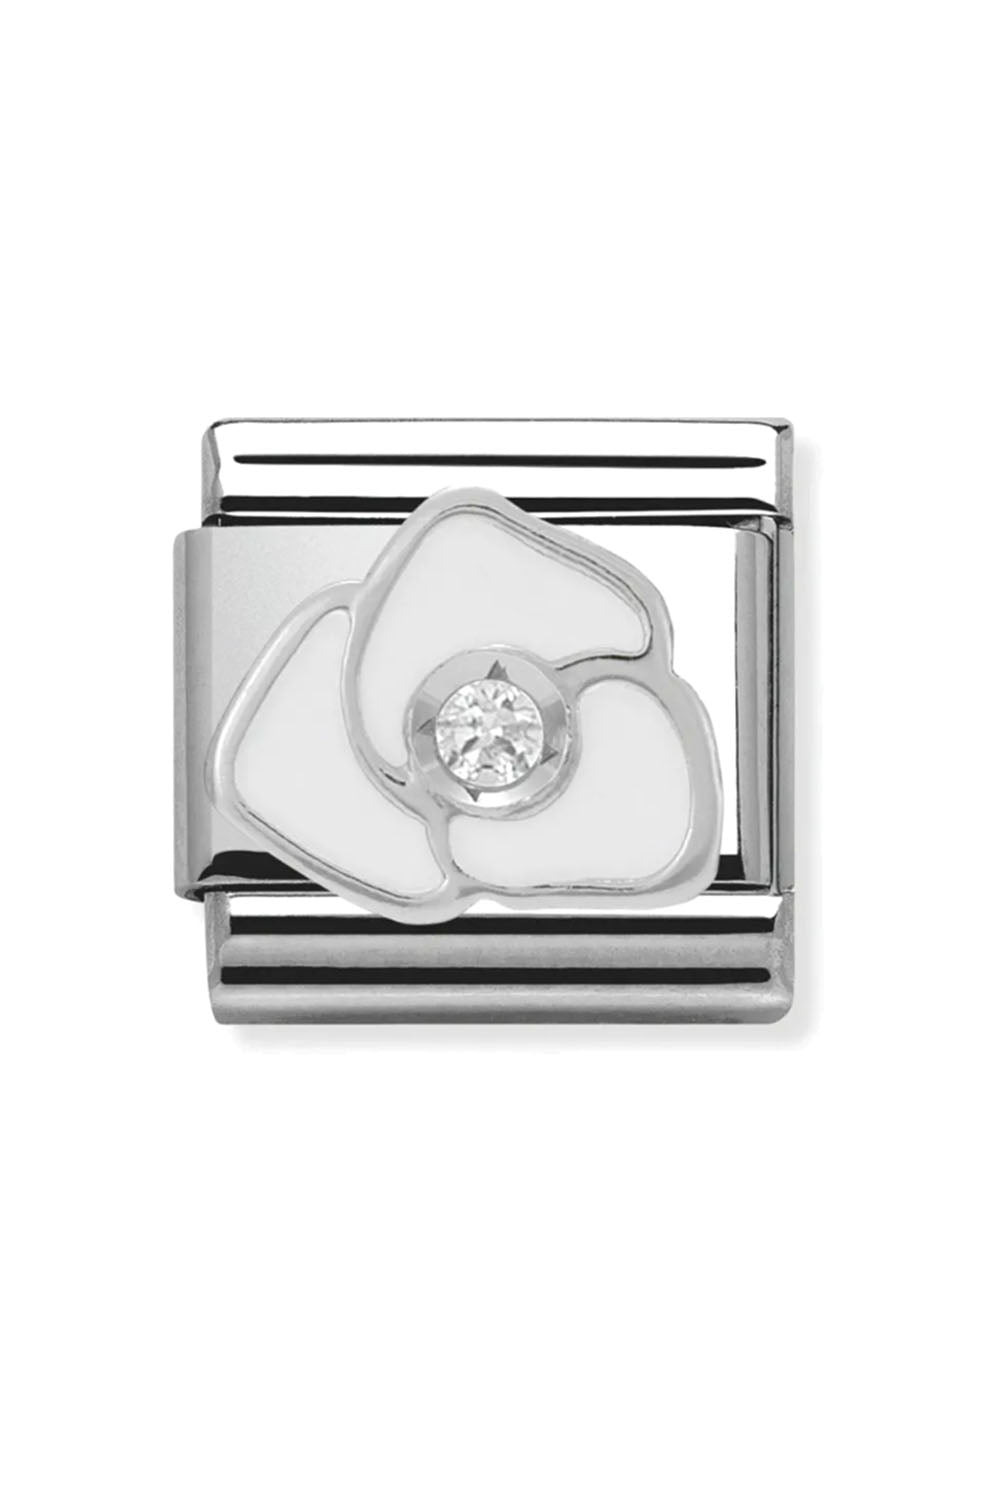 Symbols 925 Sterling Silver with enamel and CZ white rose